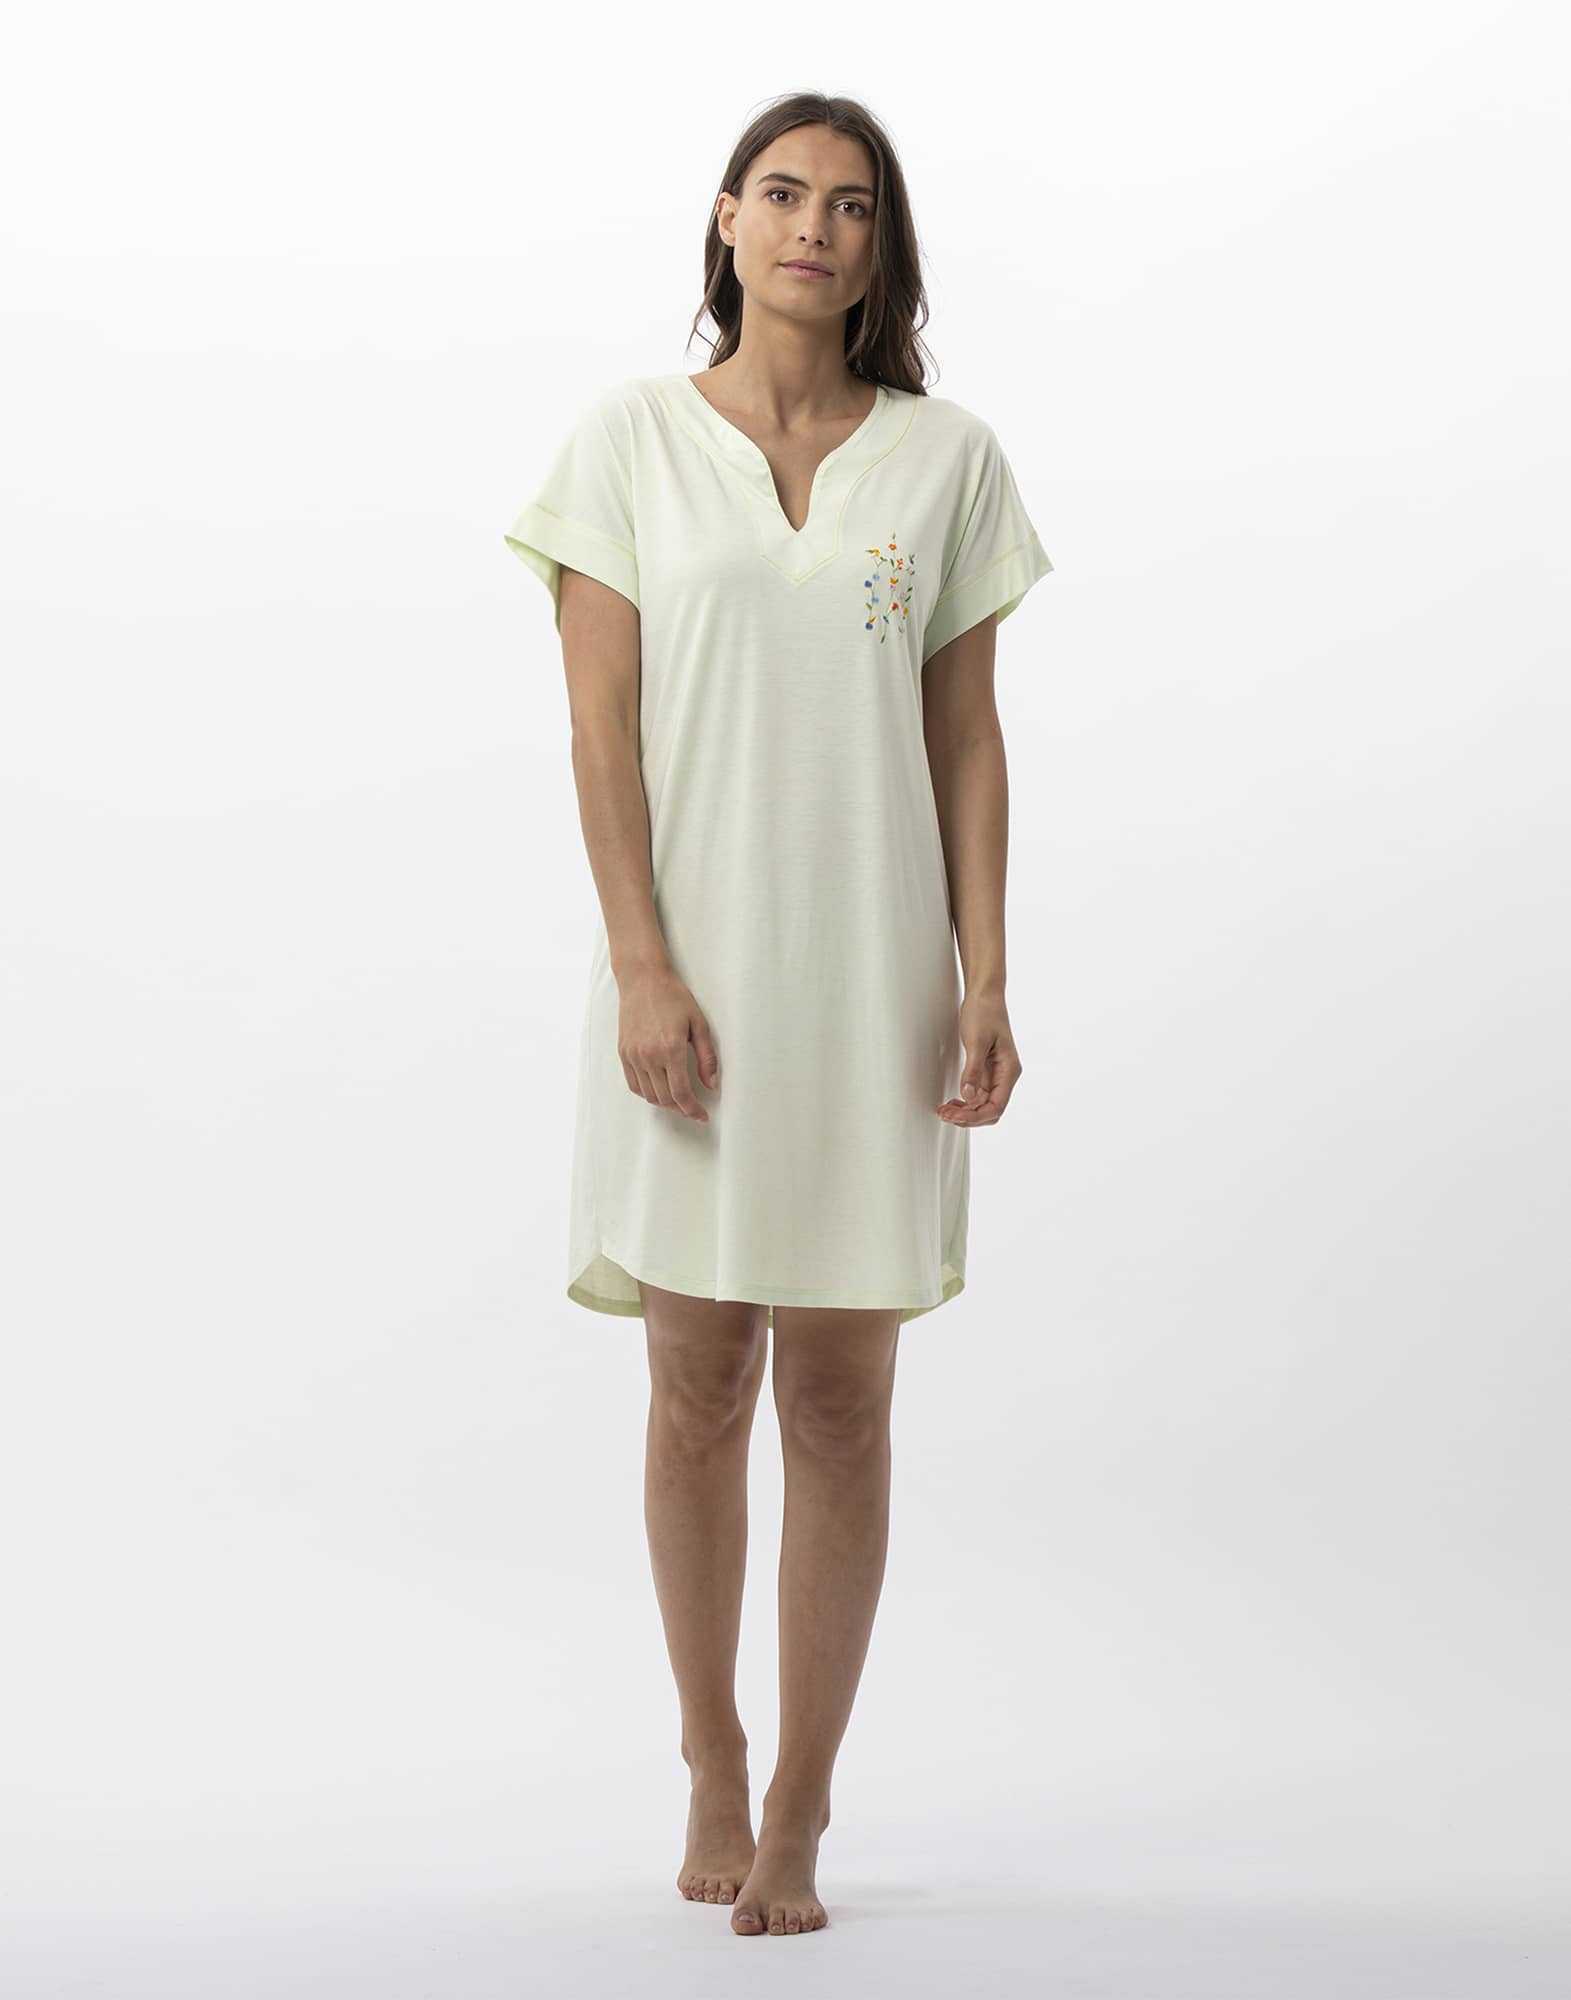 Nightdress in cotton modal RIVIERA 711 anise | Lingerie le Chat